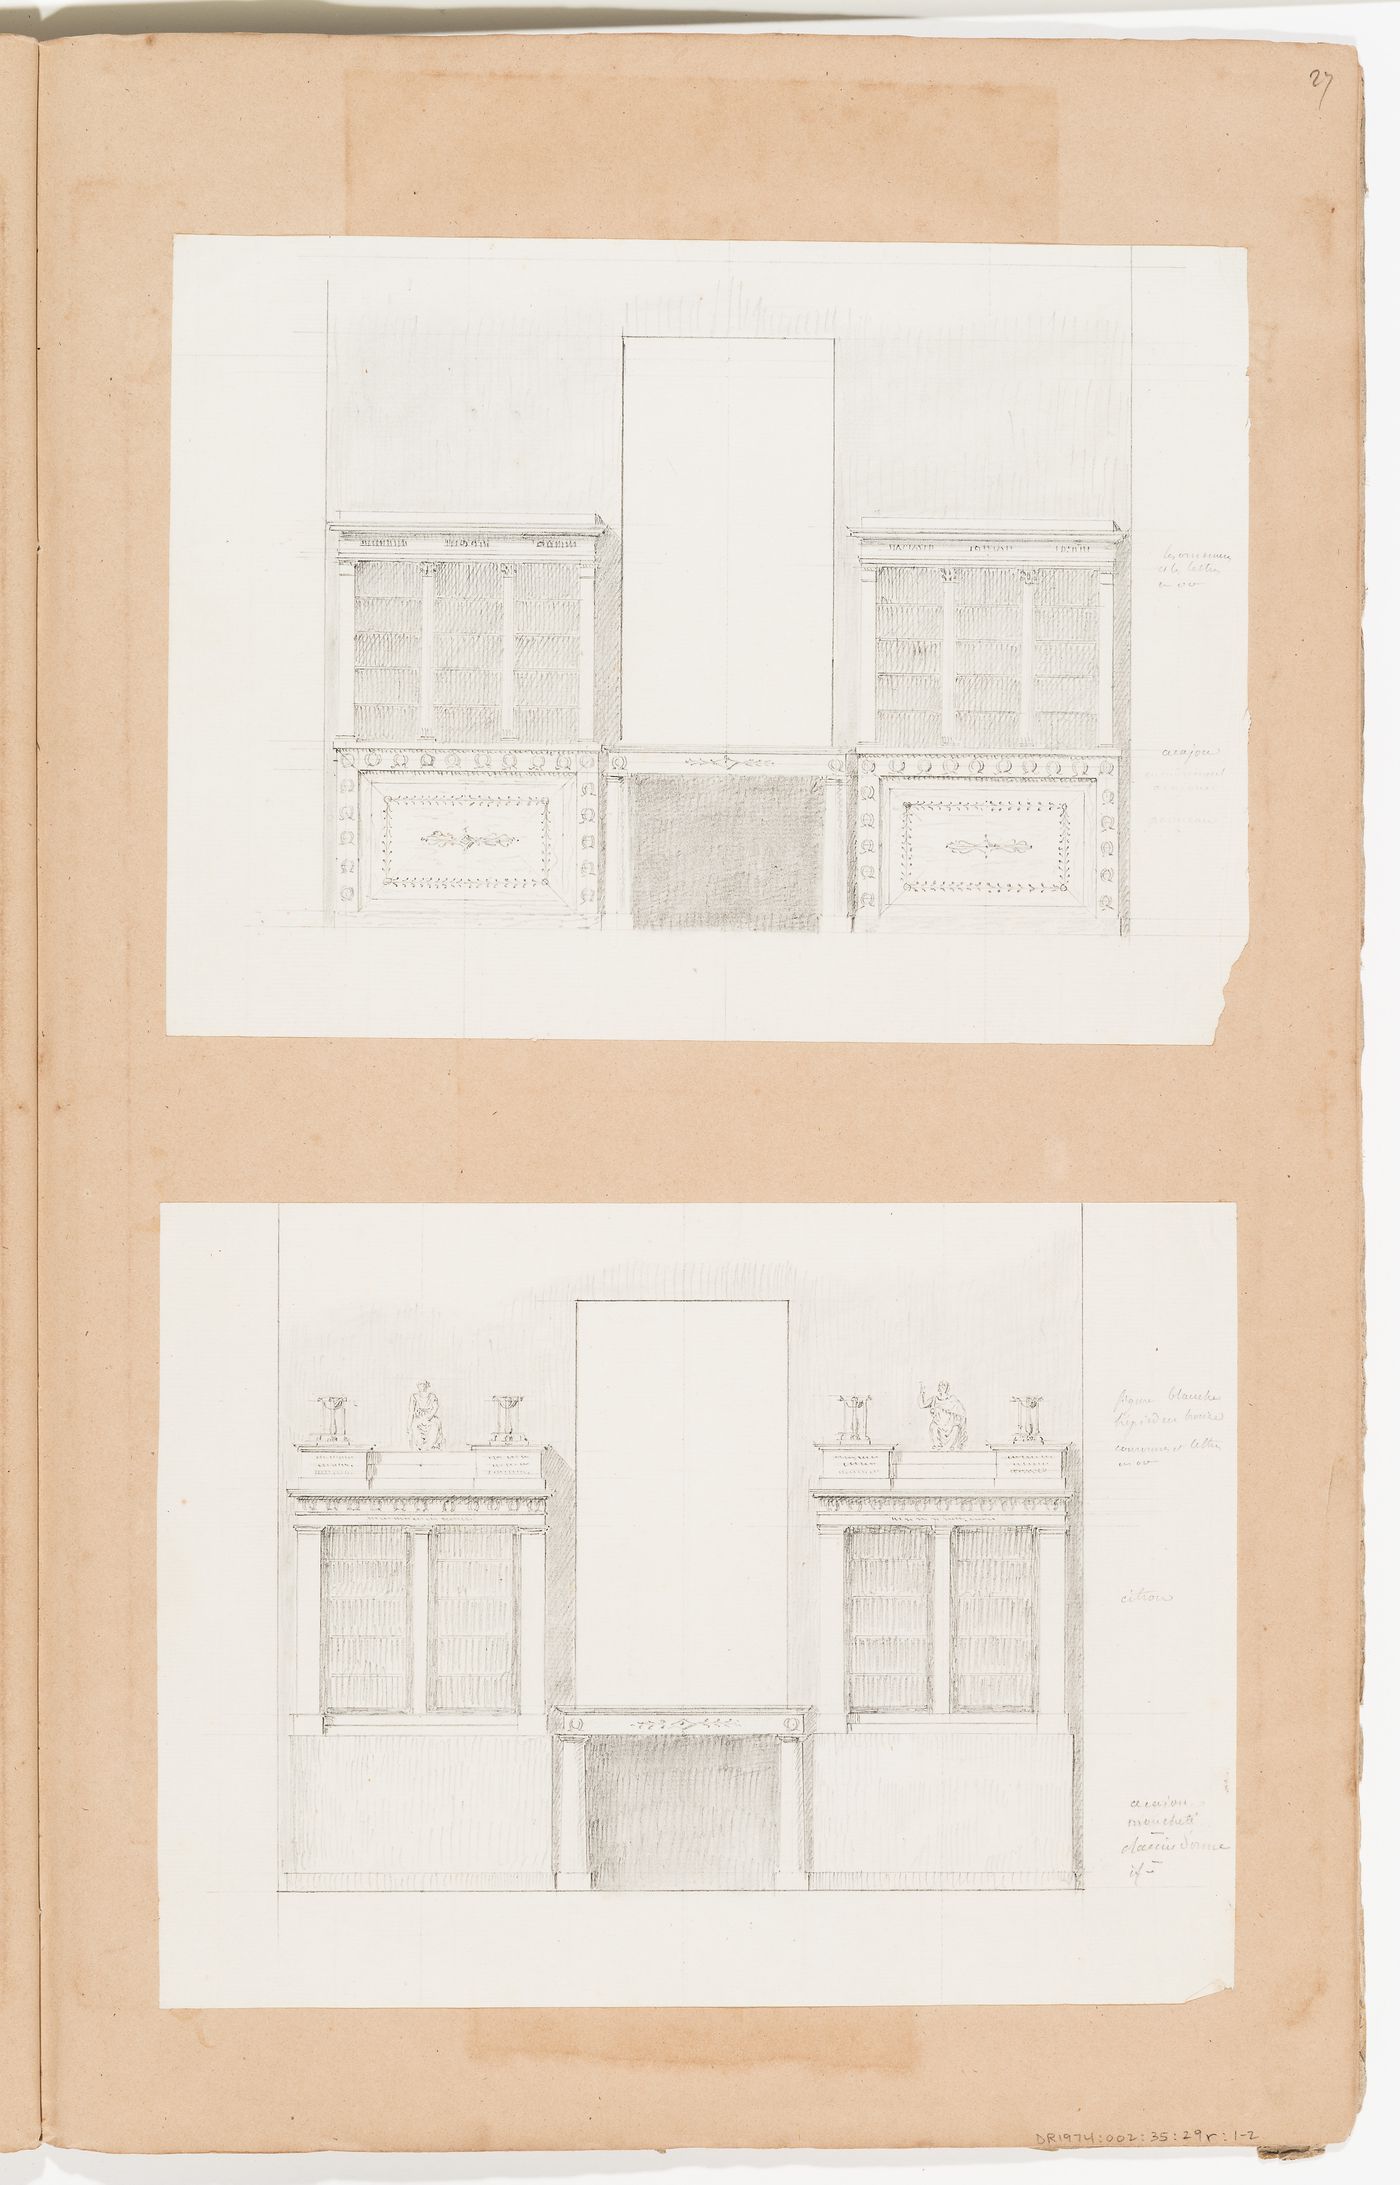 Interior wall elevations showing furniture; verso: Interior wall elevation showing a framed opening, possibly a bed alcove